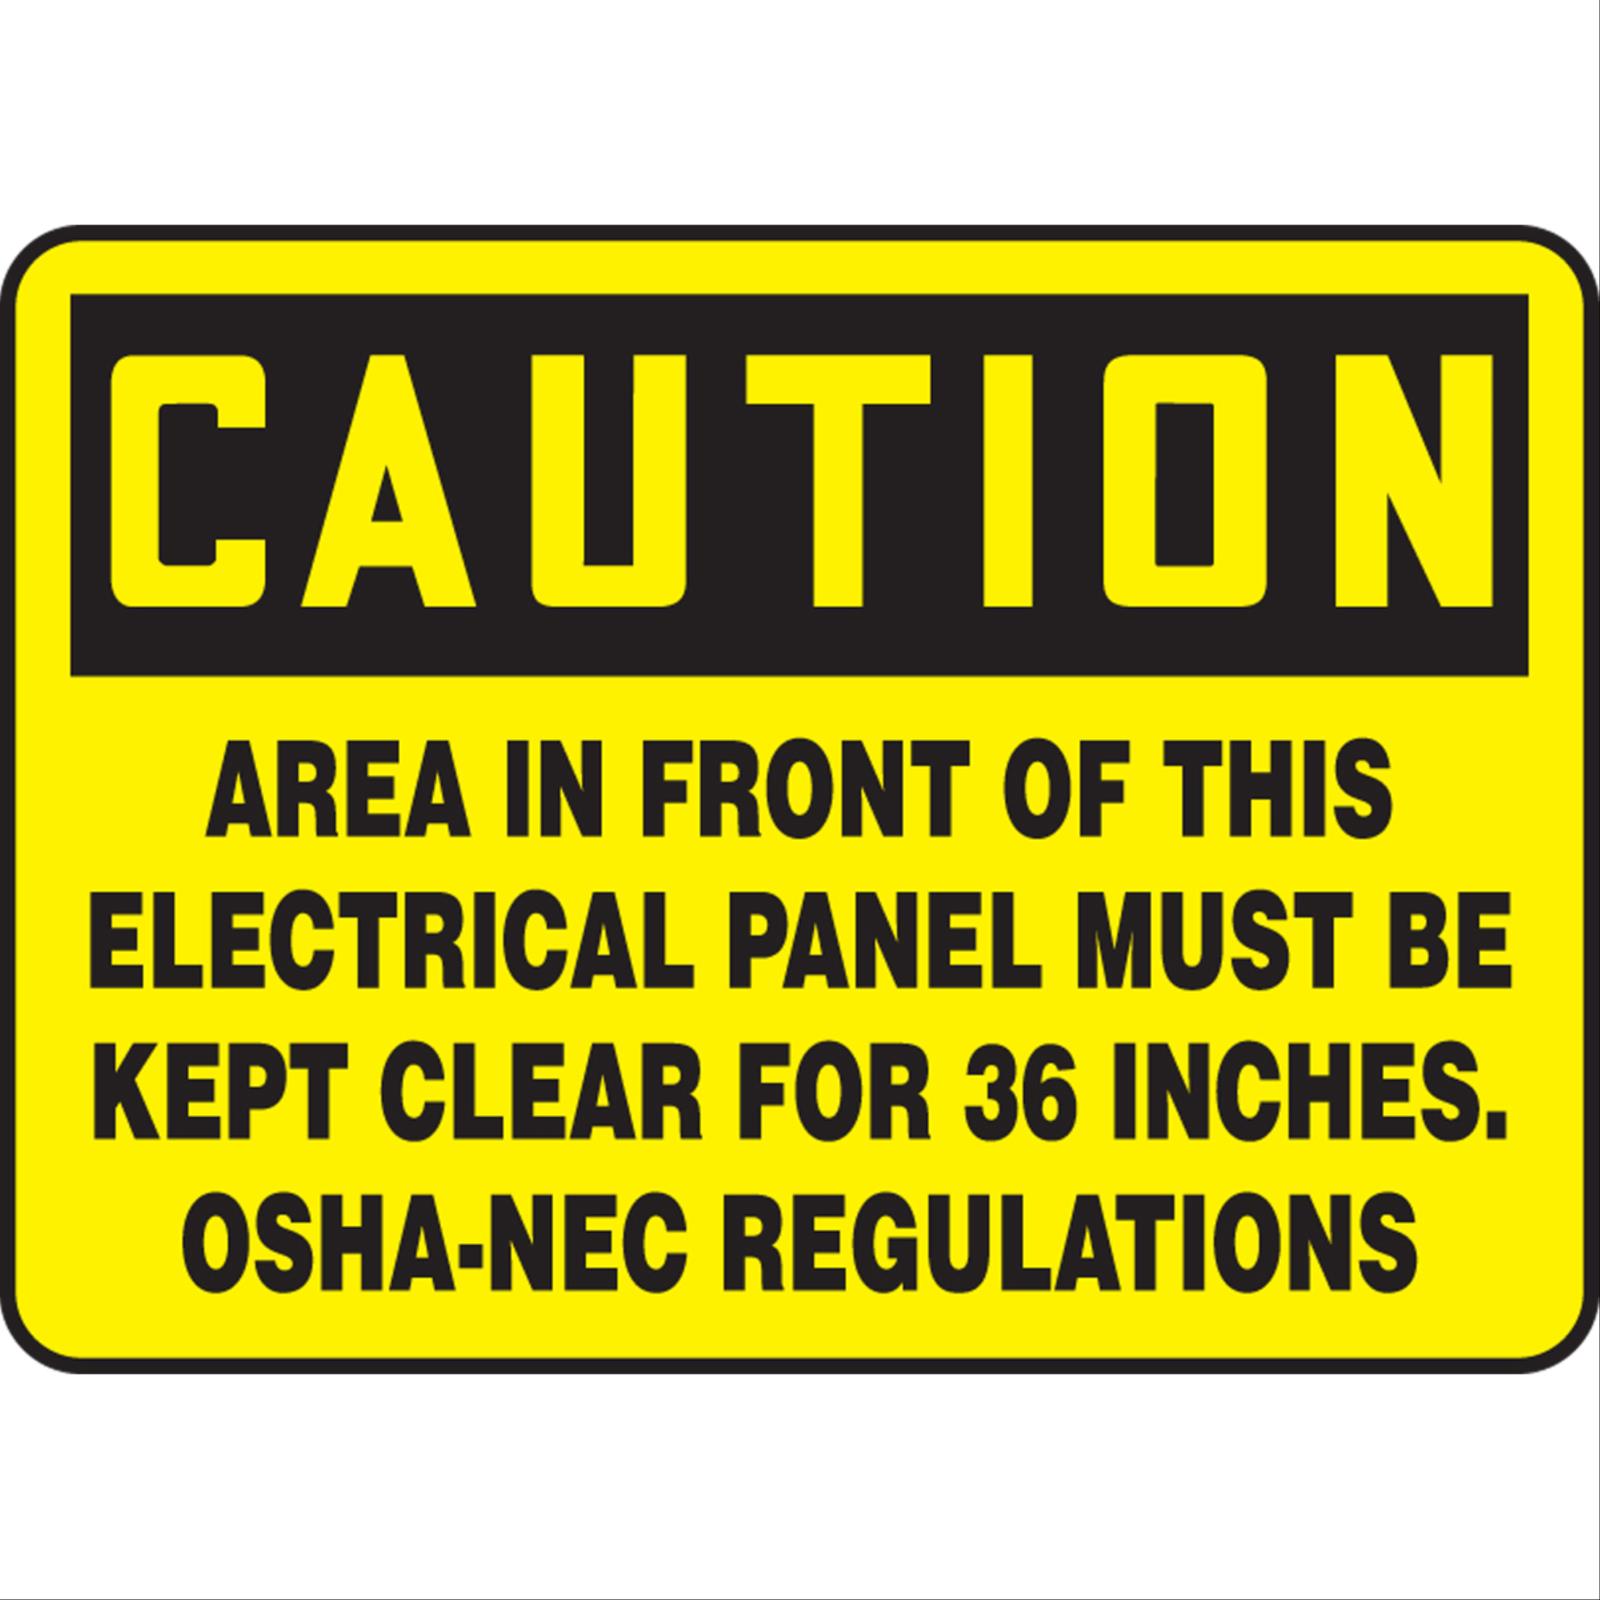 Caution Area In Front Of This Electrical Panel Must Be Kept Clear For 36 Inches